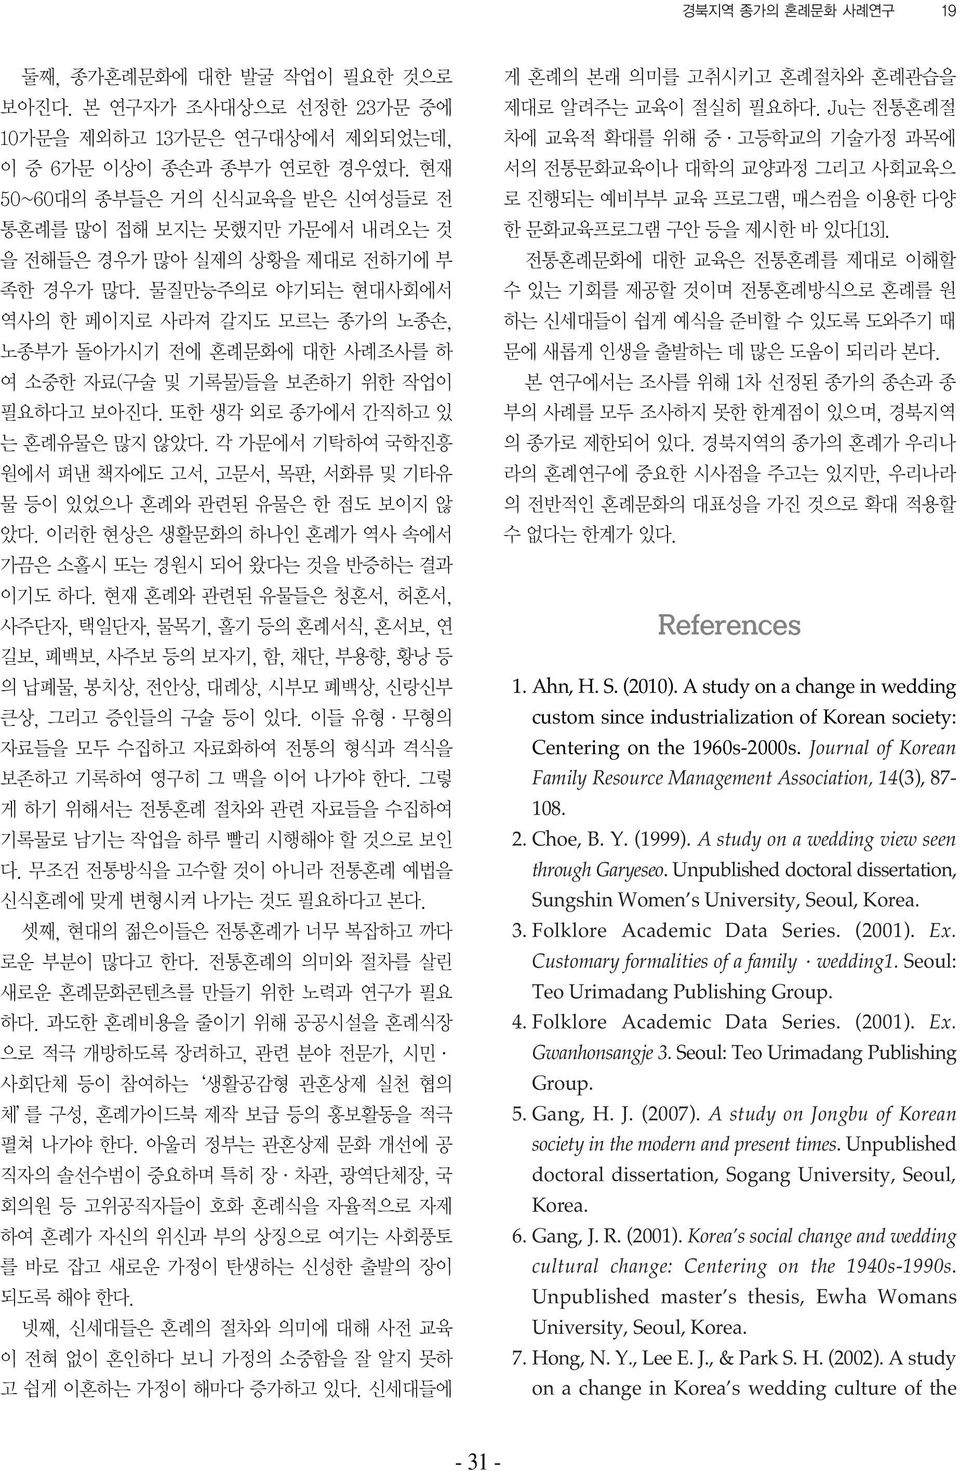 Customary formalities of a family 1. Seoul: Teo Urimadang Publishing Group. 4. Folklore Academic Data Series. (2001). Ex. Gwanhonsangje 3. Seoul: Teo Urimadang Publishing Group. 5. Gang, H. J. (2007).